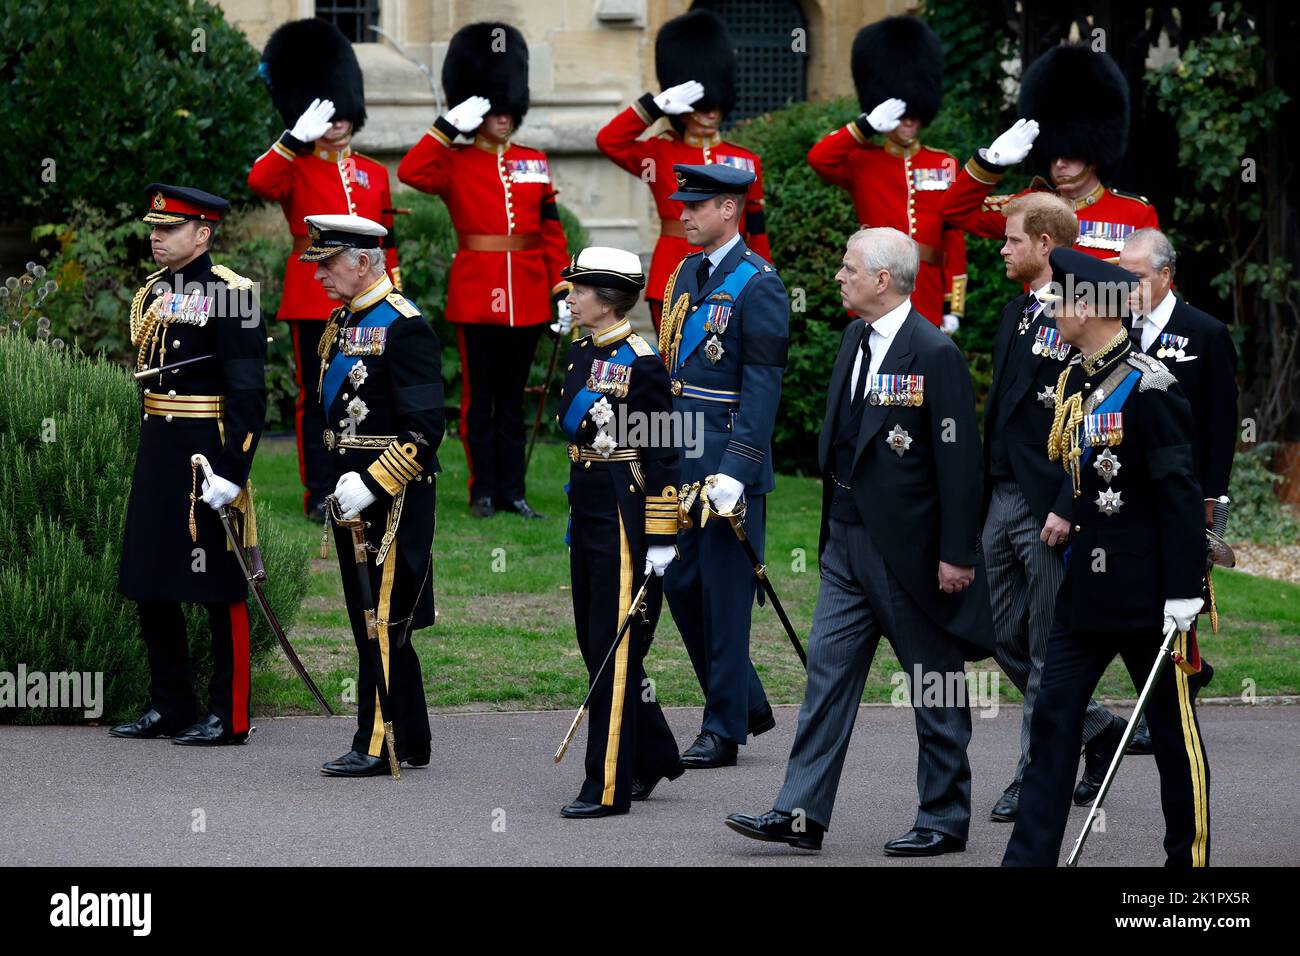 King Charles III, the Princess Royal, the Prince of Wales, Prince, the Duke of York, the Earl of Wessex, the Duke of Kent, Prince and the Duke of Sussex arrive at the Committal Service for Queen Elizabeth II held at St George's Chapel in Windsor Castle, Berkshire. Picture date: Monday September 19, 2022. Stock Photo